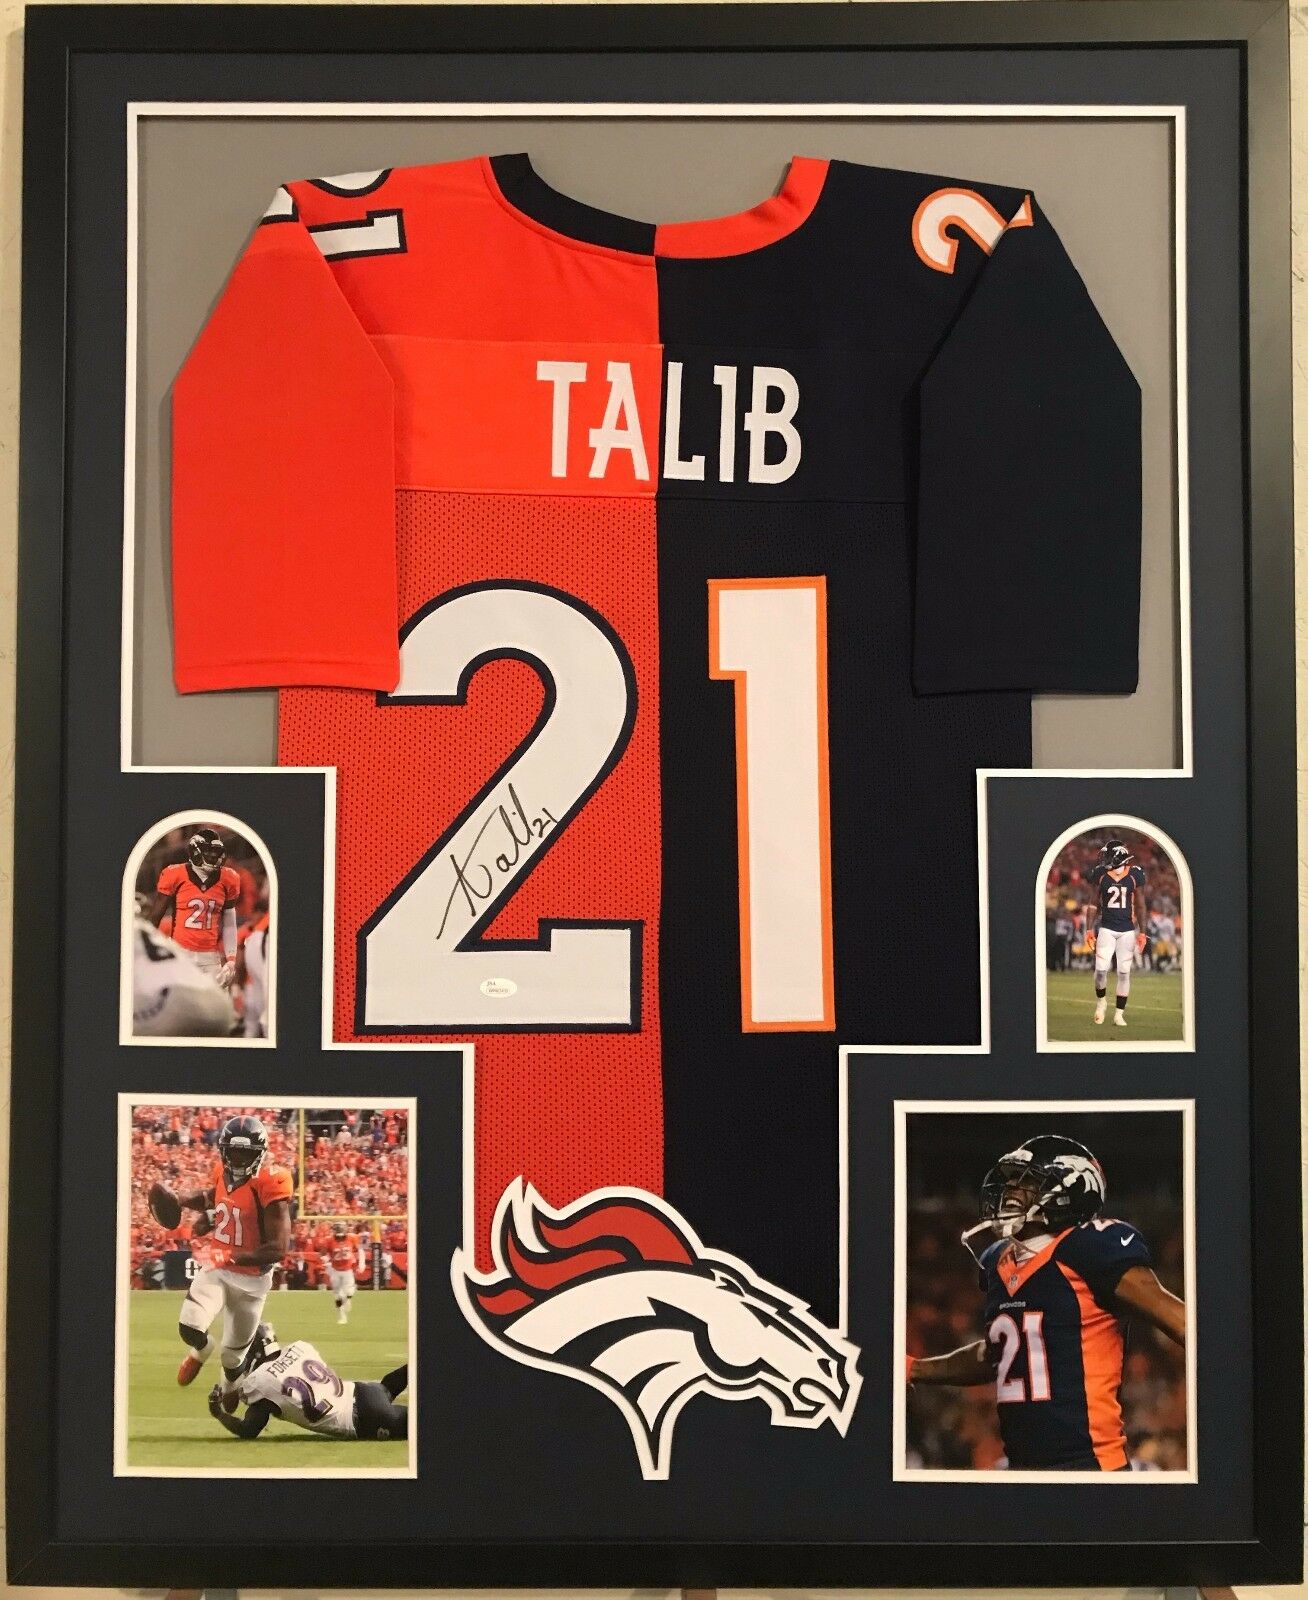 Aqib Talib Authentic Signed Pro Style Framed Jersey Autographed JSA